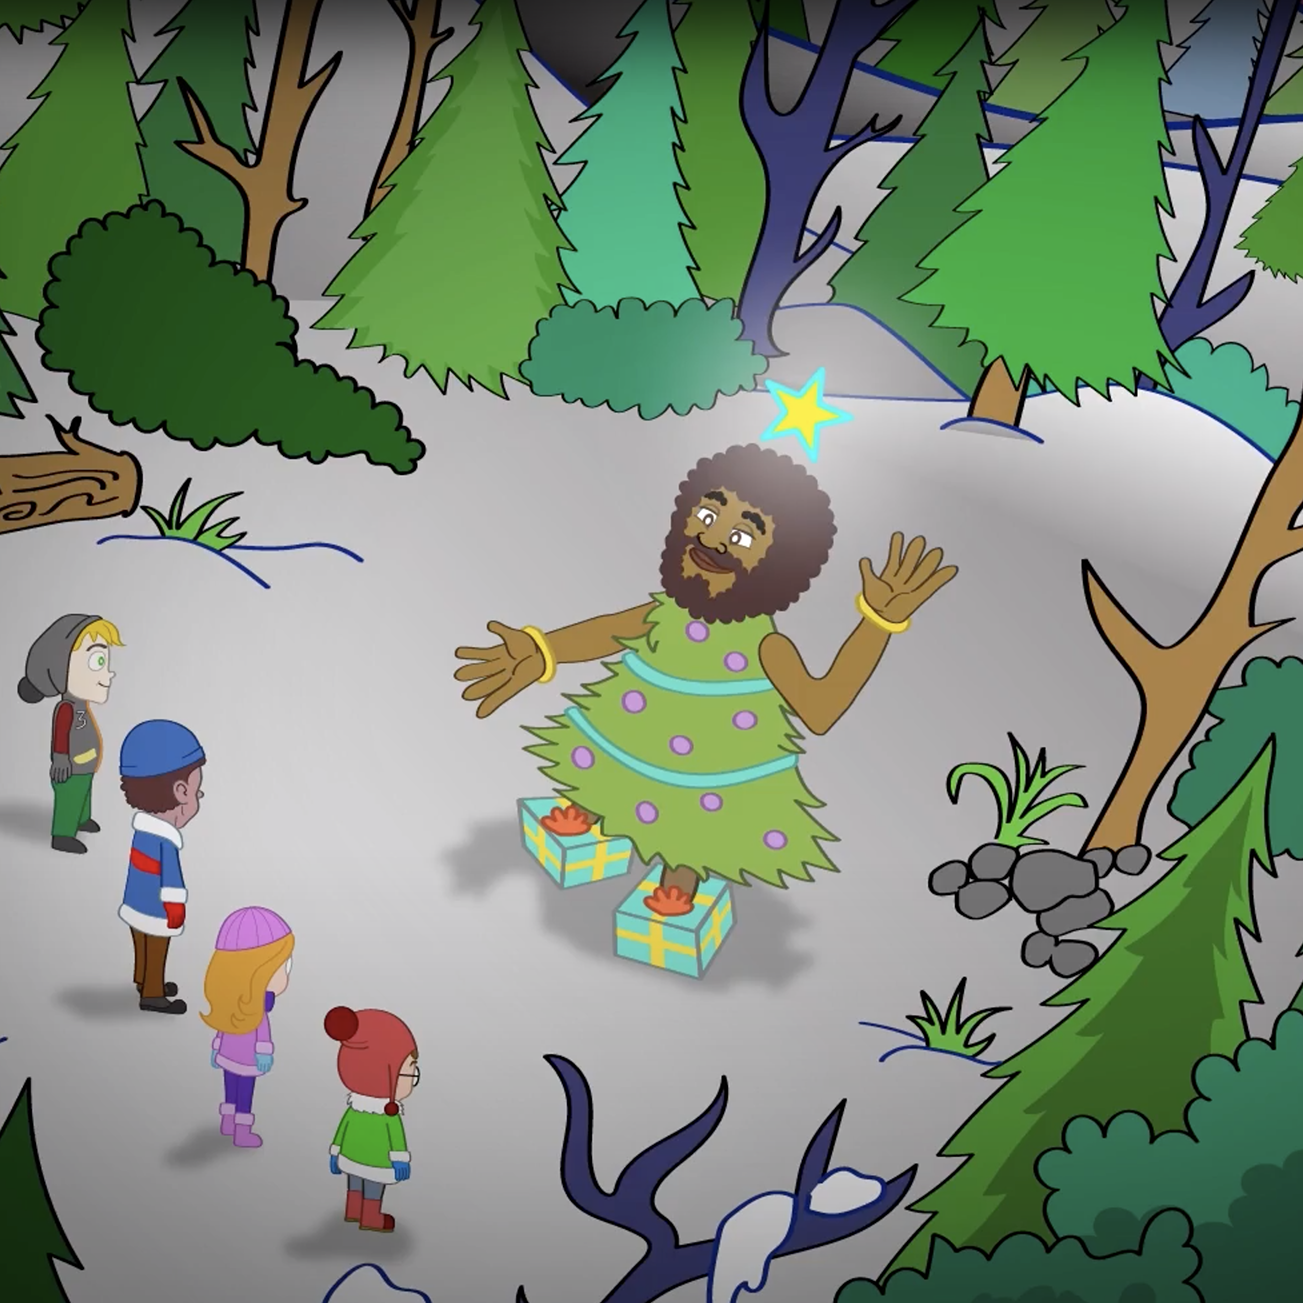 The Great Christmas Tree sings to the Pearl children in the magic forest.